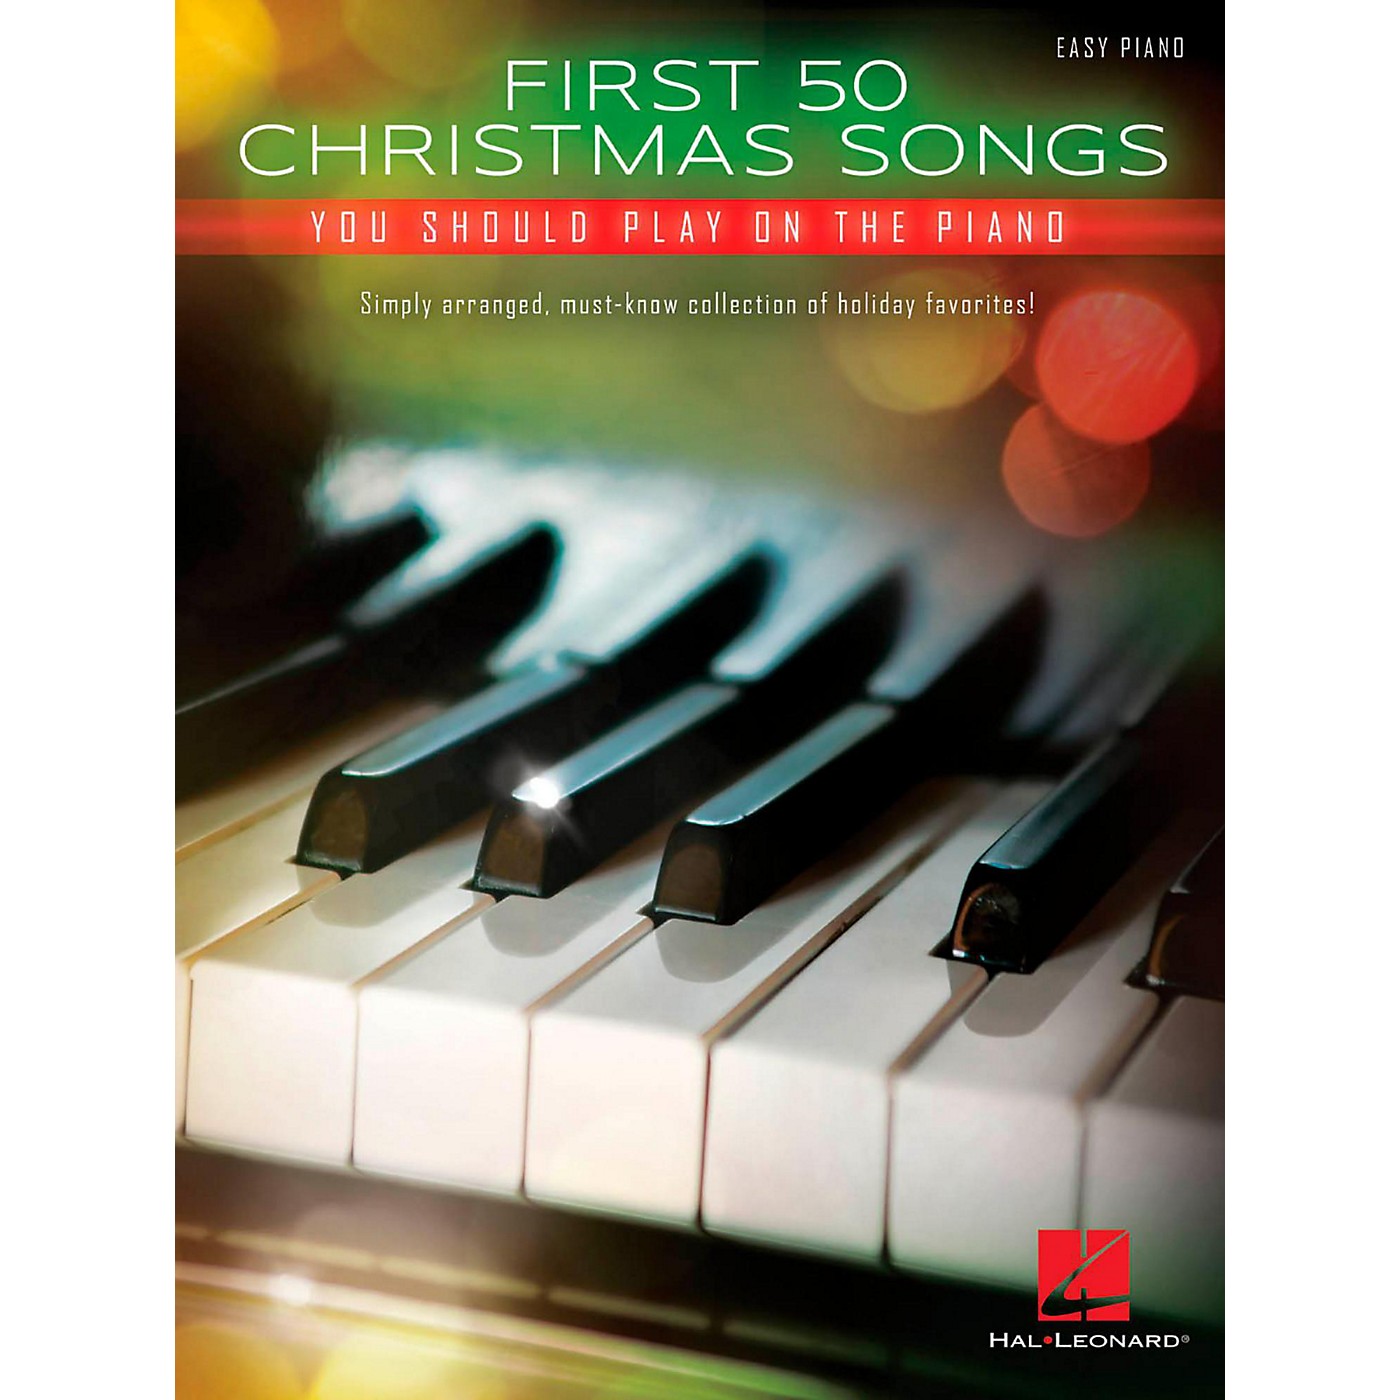 Hal Leonard First 50 Christmas Songs You Should Play on the Piano - Easy Piano thumbnail